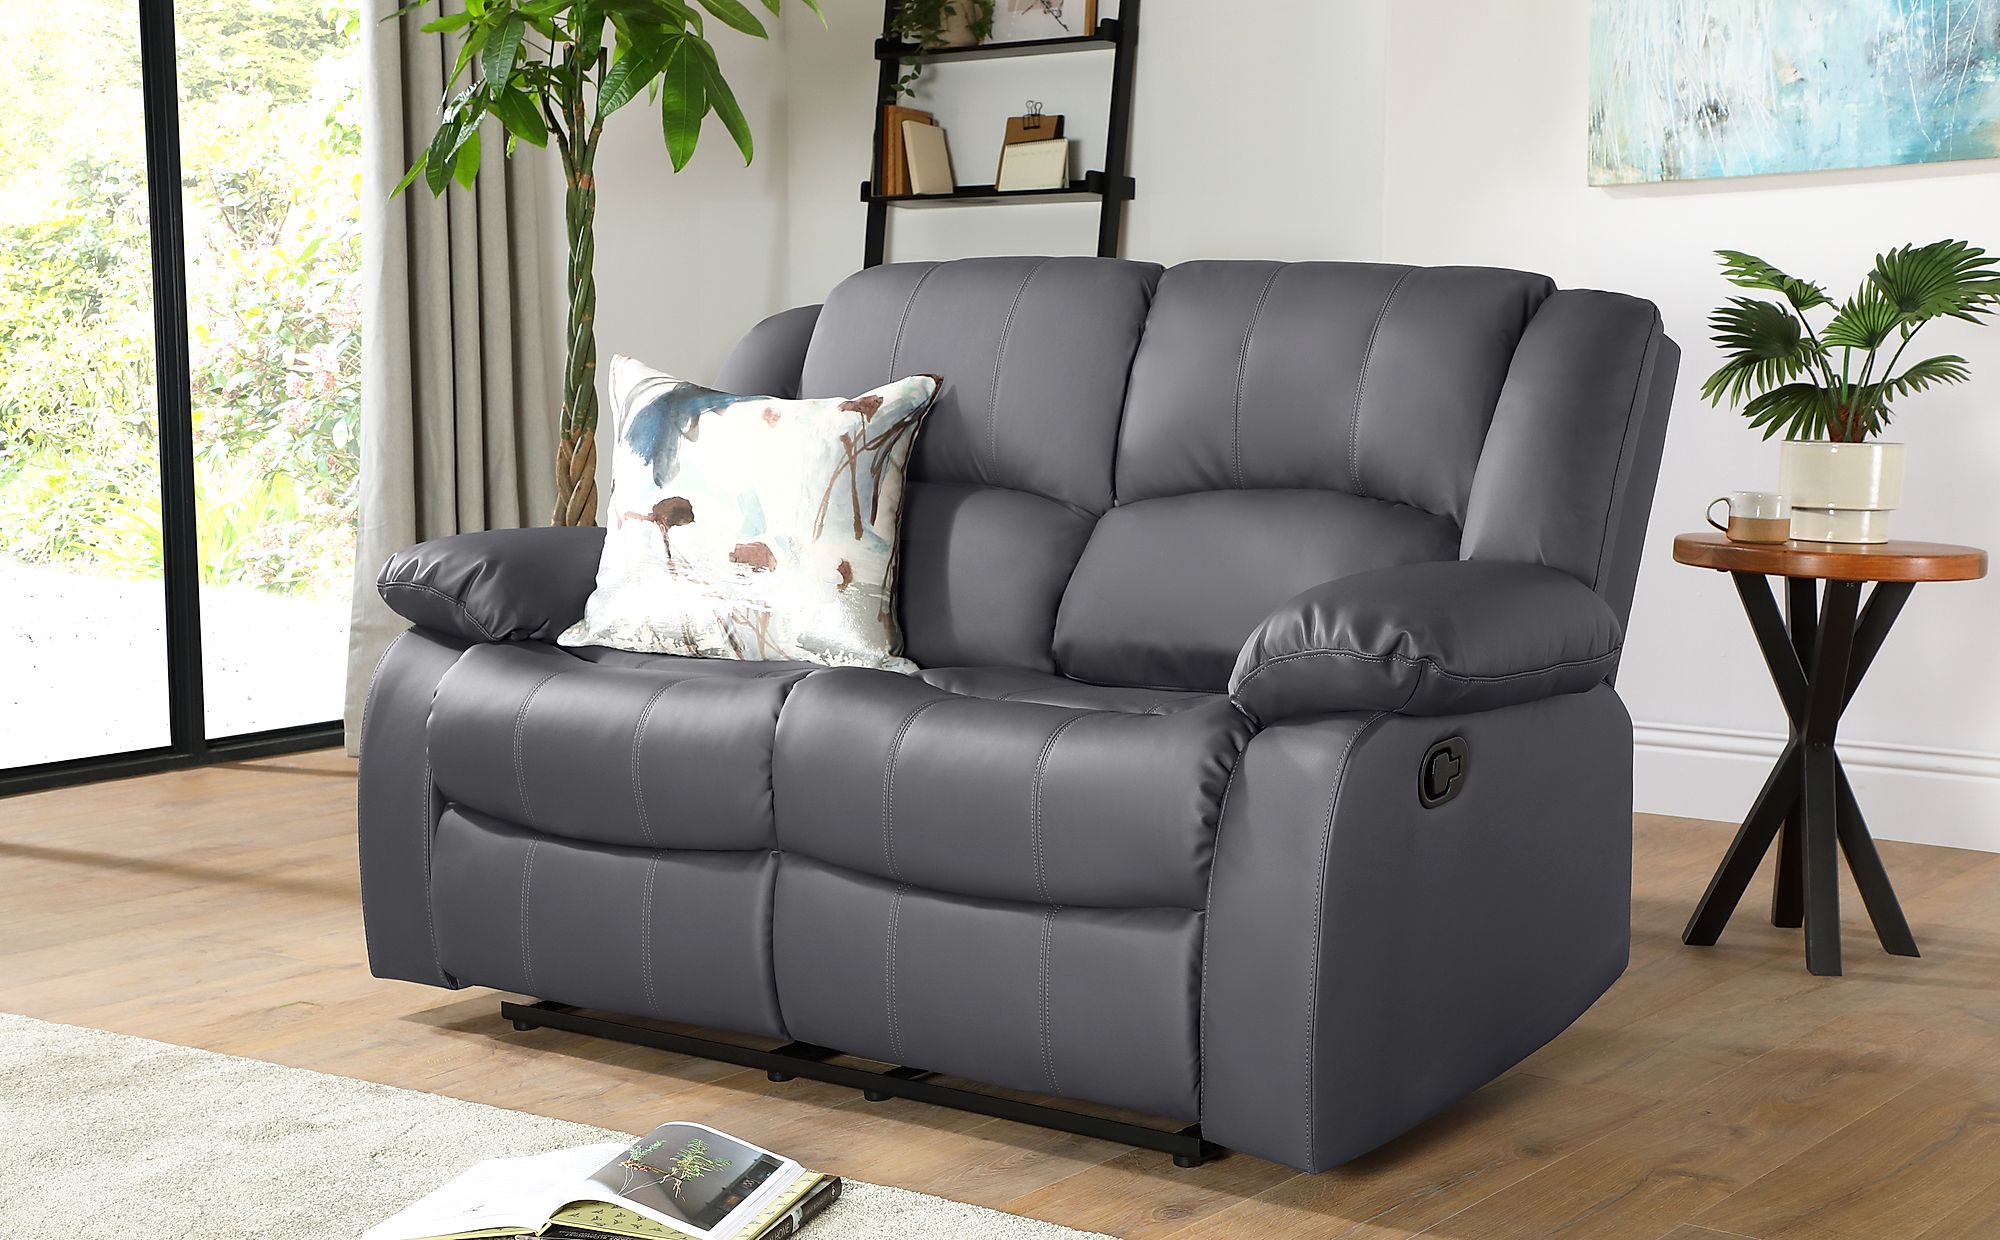 gray sofa with brown leather chair